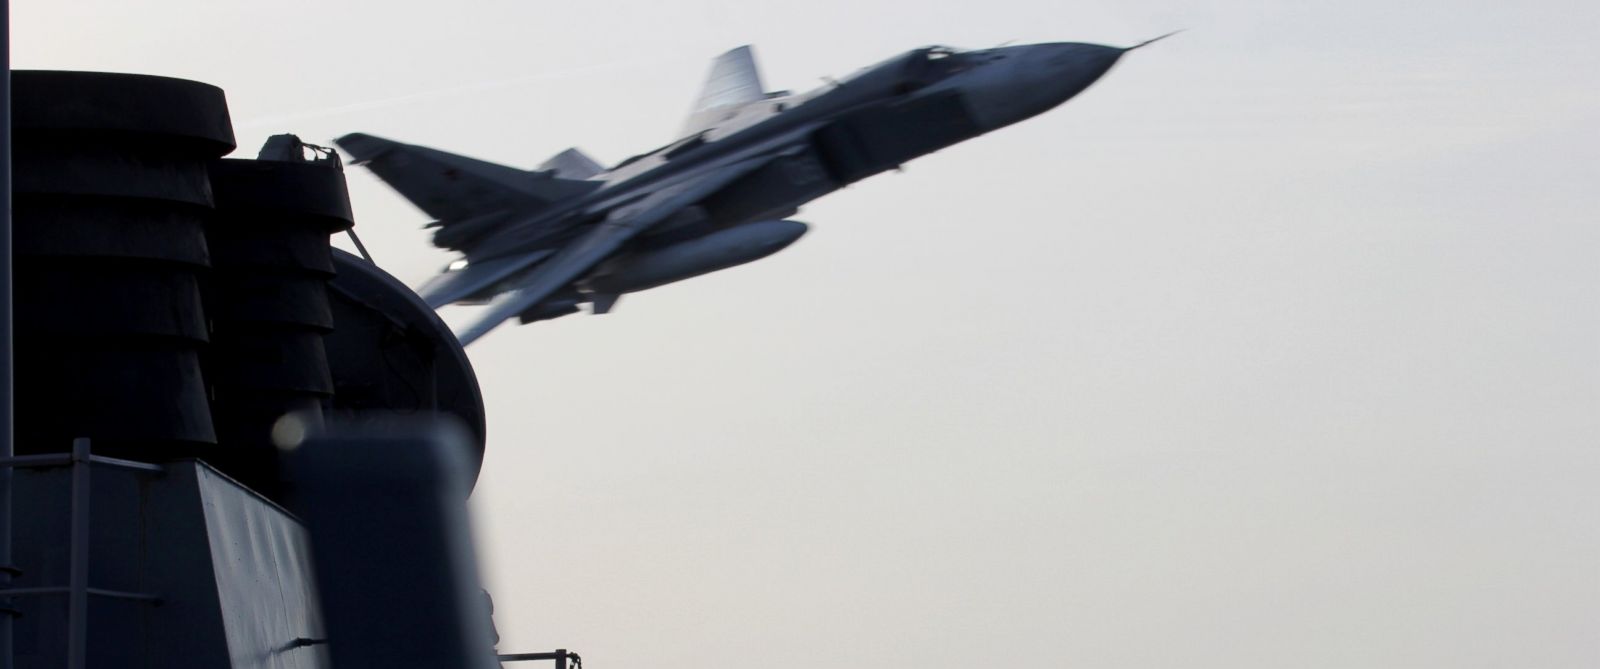 Russian Fighters Buzz Us Navy Destroyer At Close Range In Baltic Sea